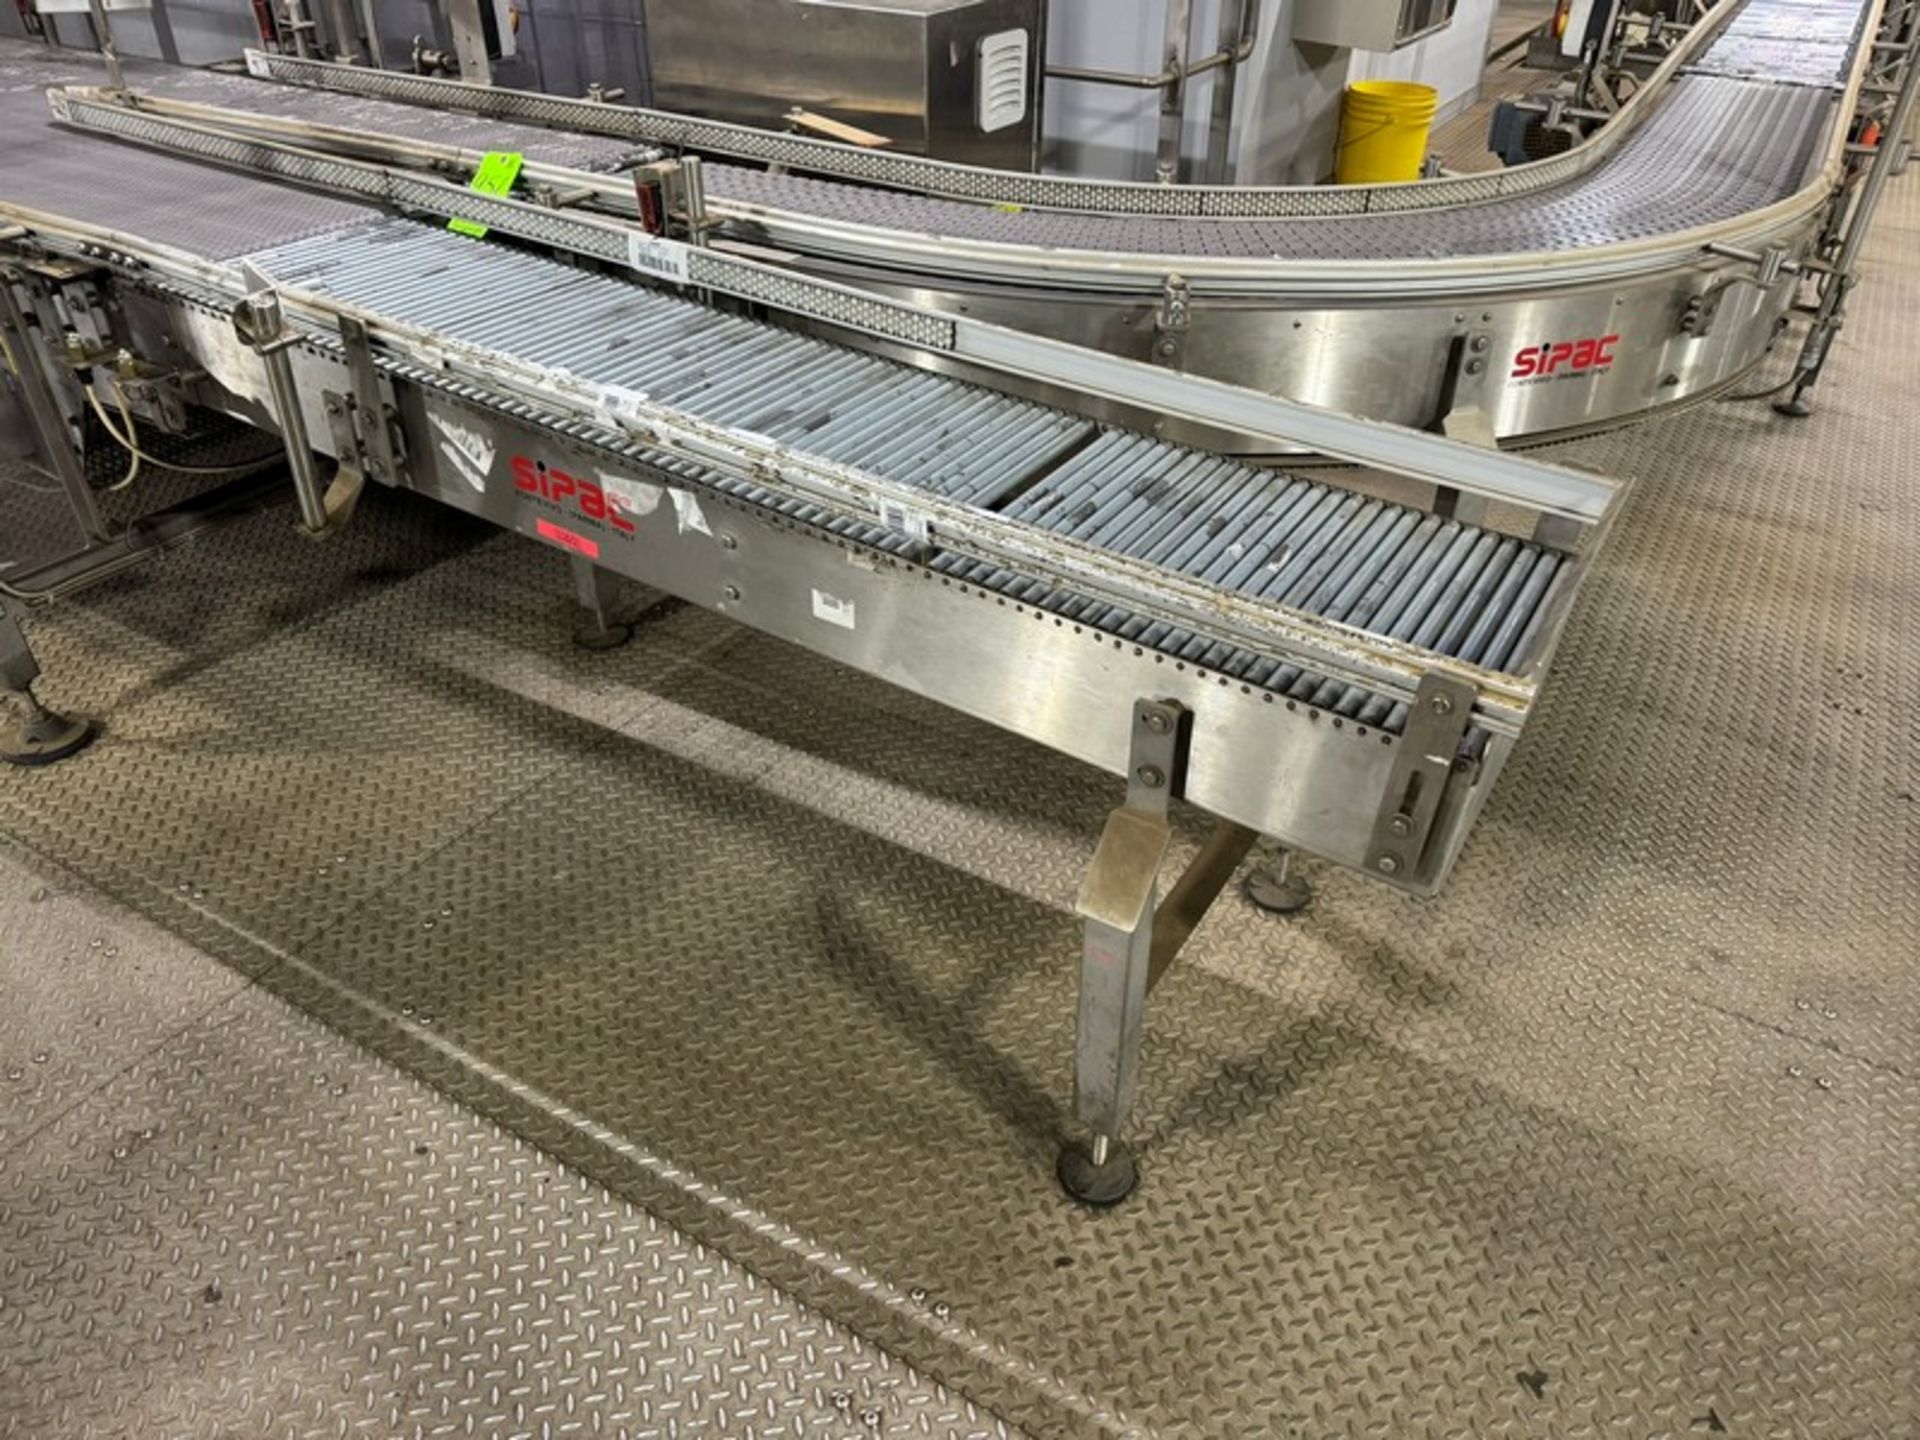 SIPAC Orientor, with Aprox. 36-3/4” W Conveyor Belt, with Enclosure (LOCATED IN FREEHOLD, N.J.) - Image 3 of 7